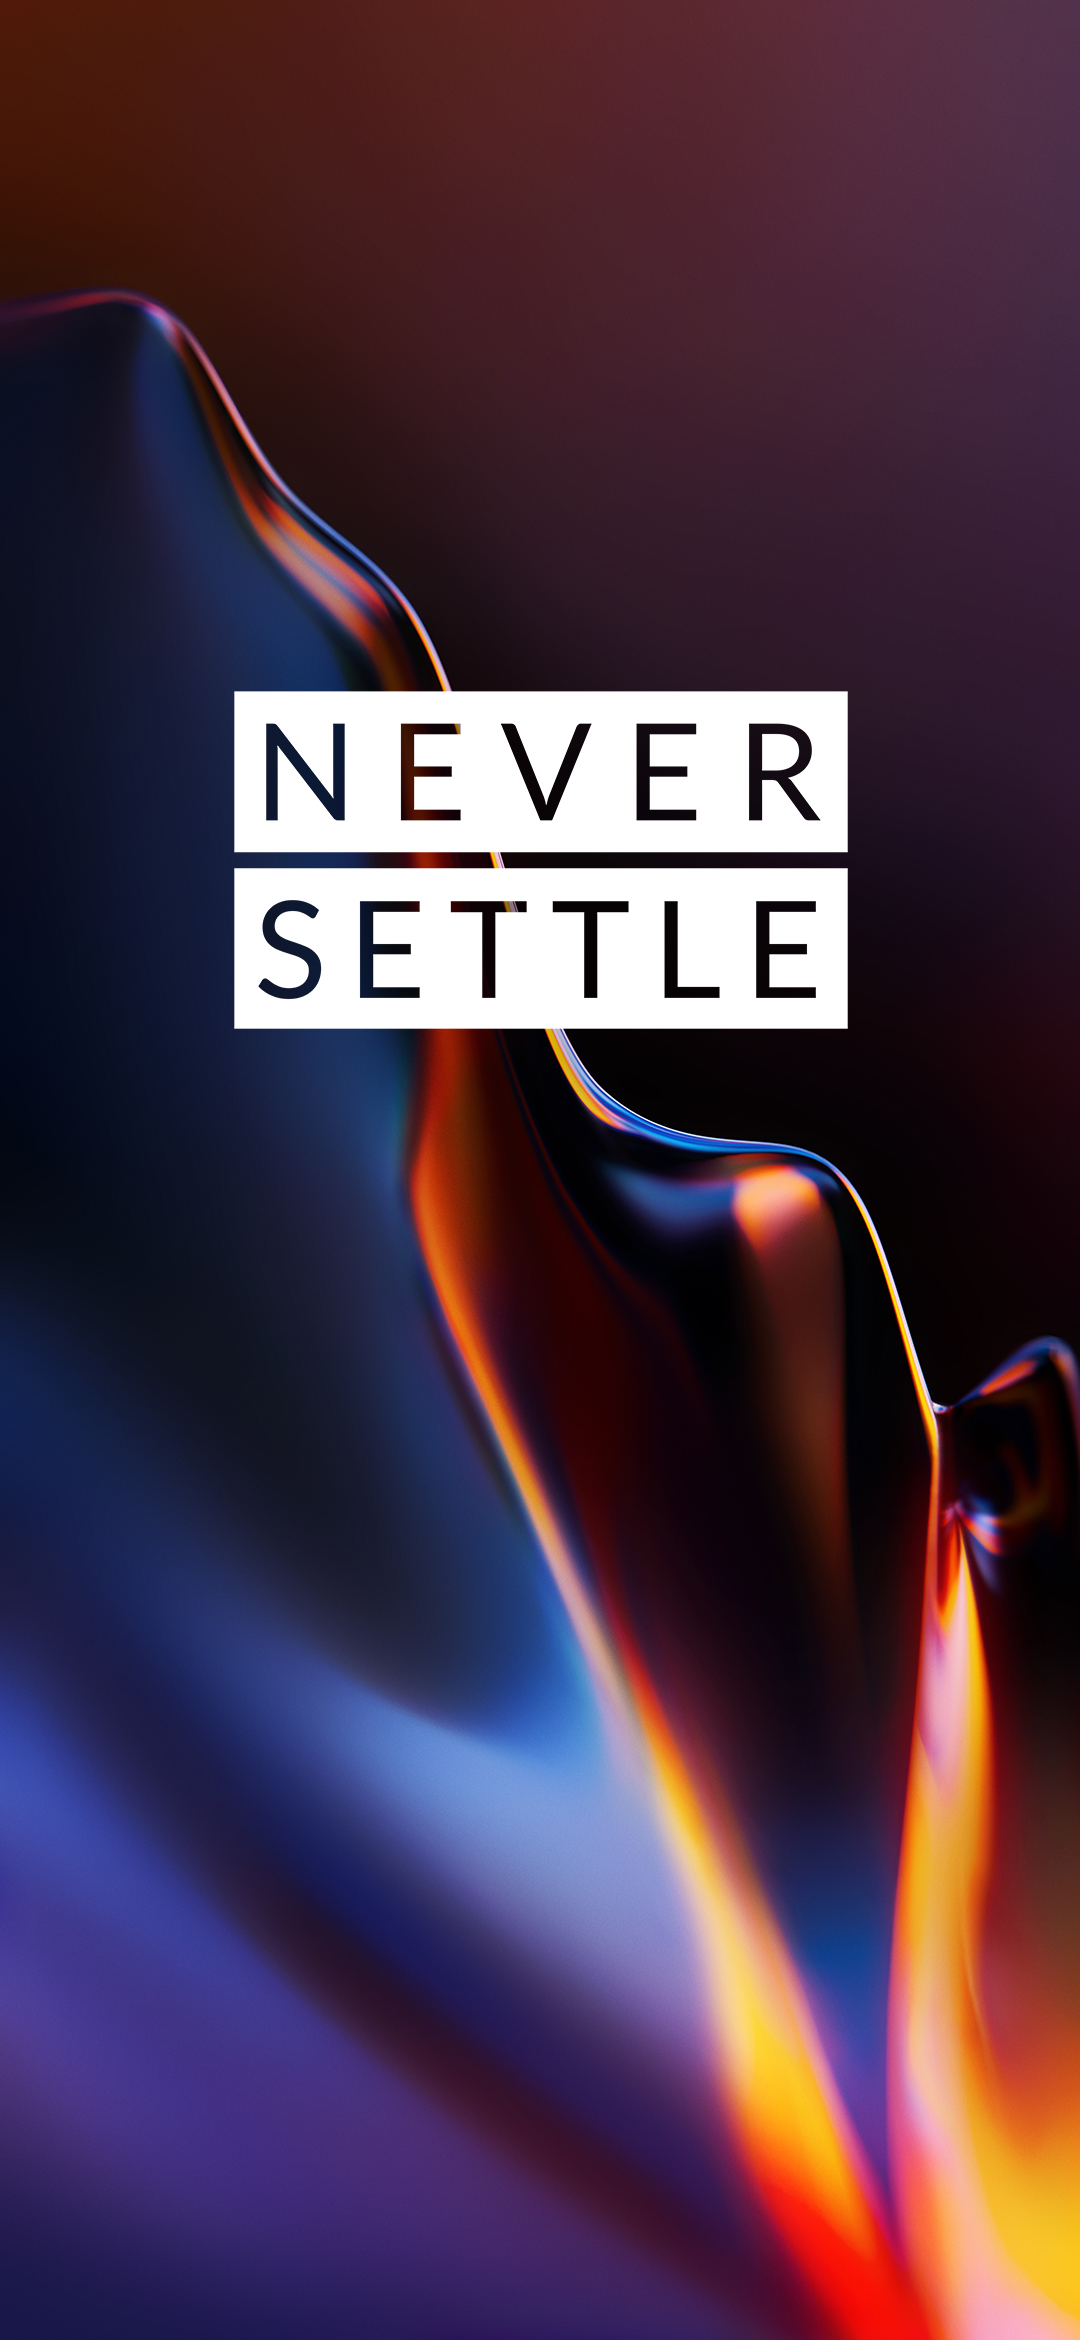 Download Oneplus 6t Fhd Wallpapers - Never Settle Wallpaper Hd Oneplus 6t , HD Wallpaper & Backgrounds